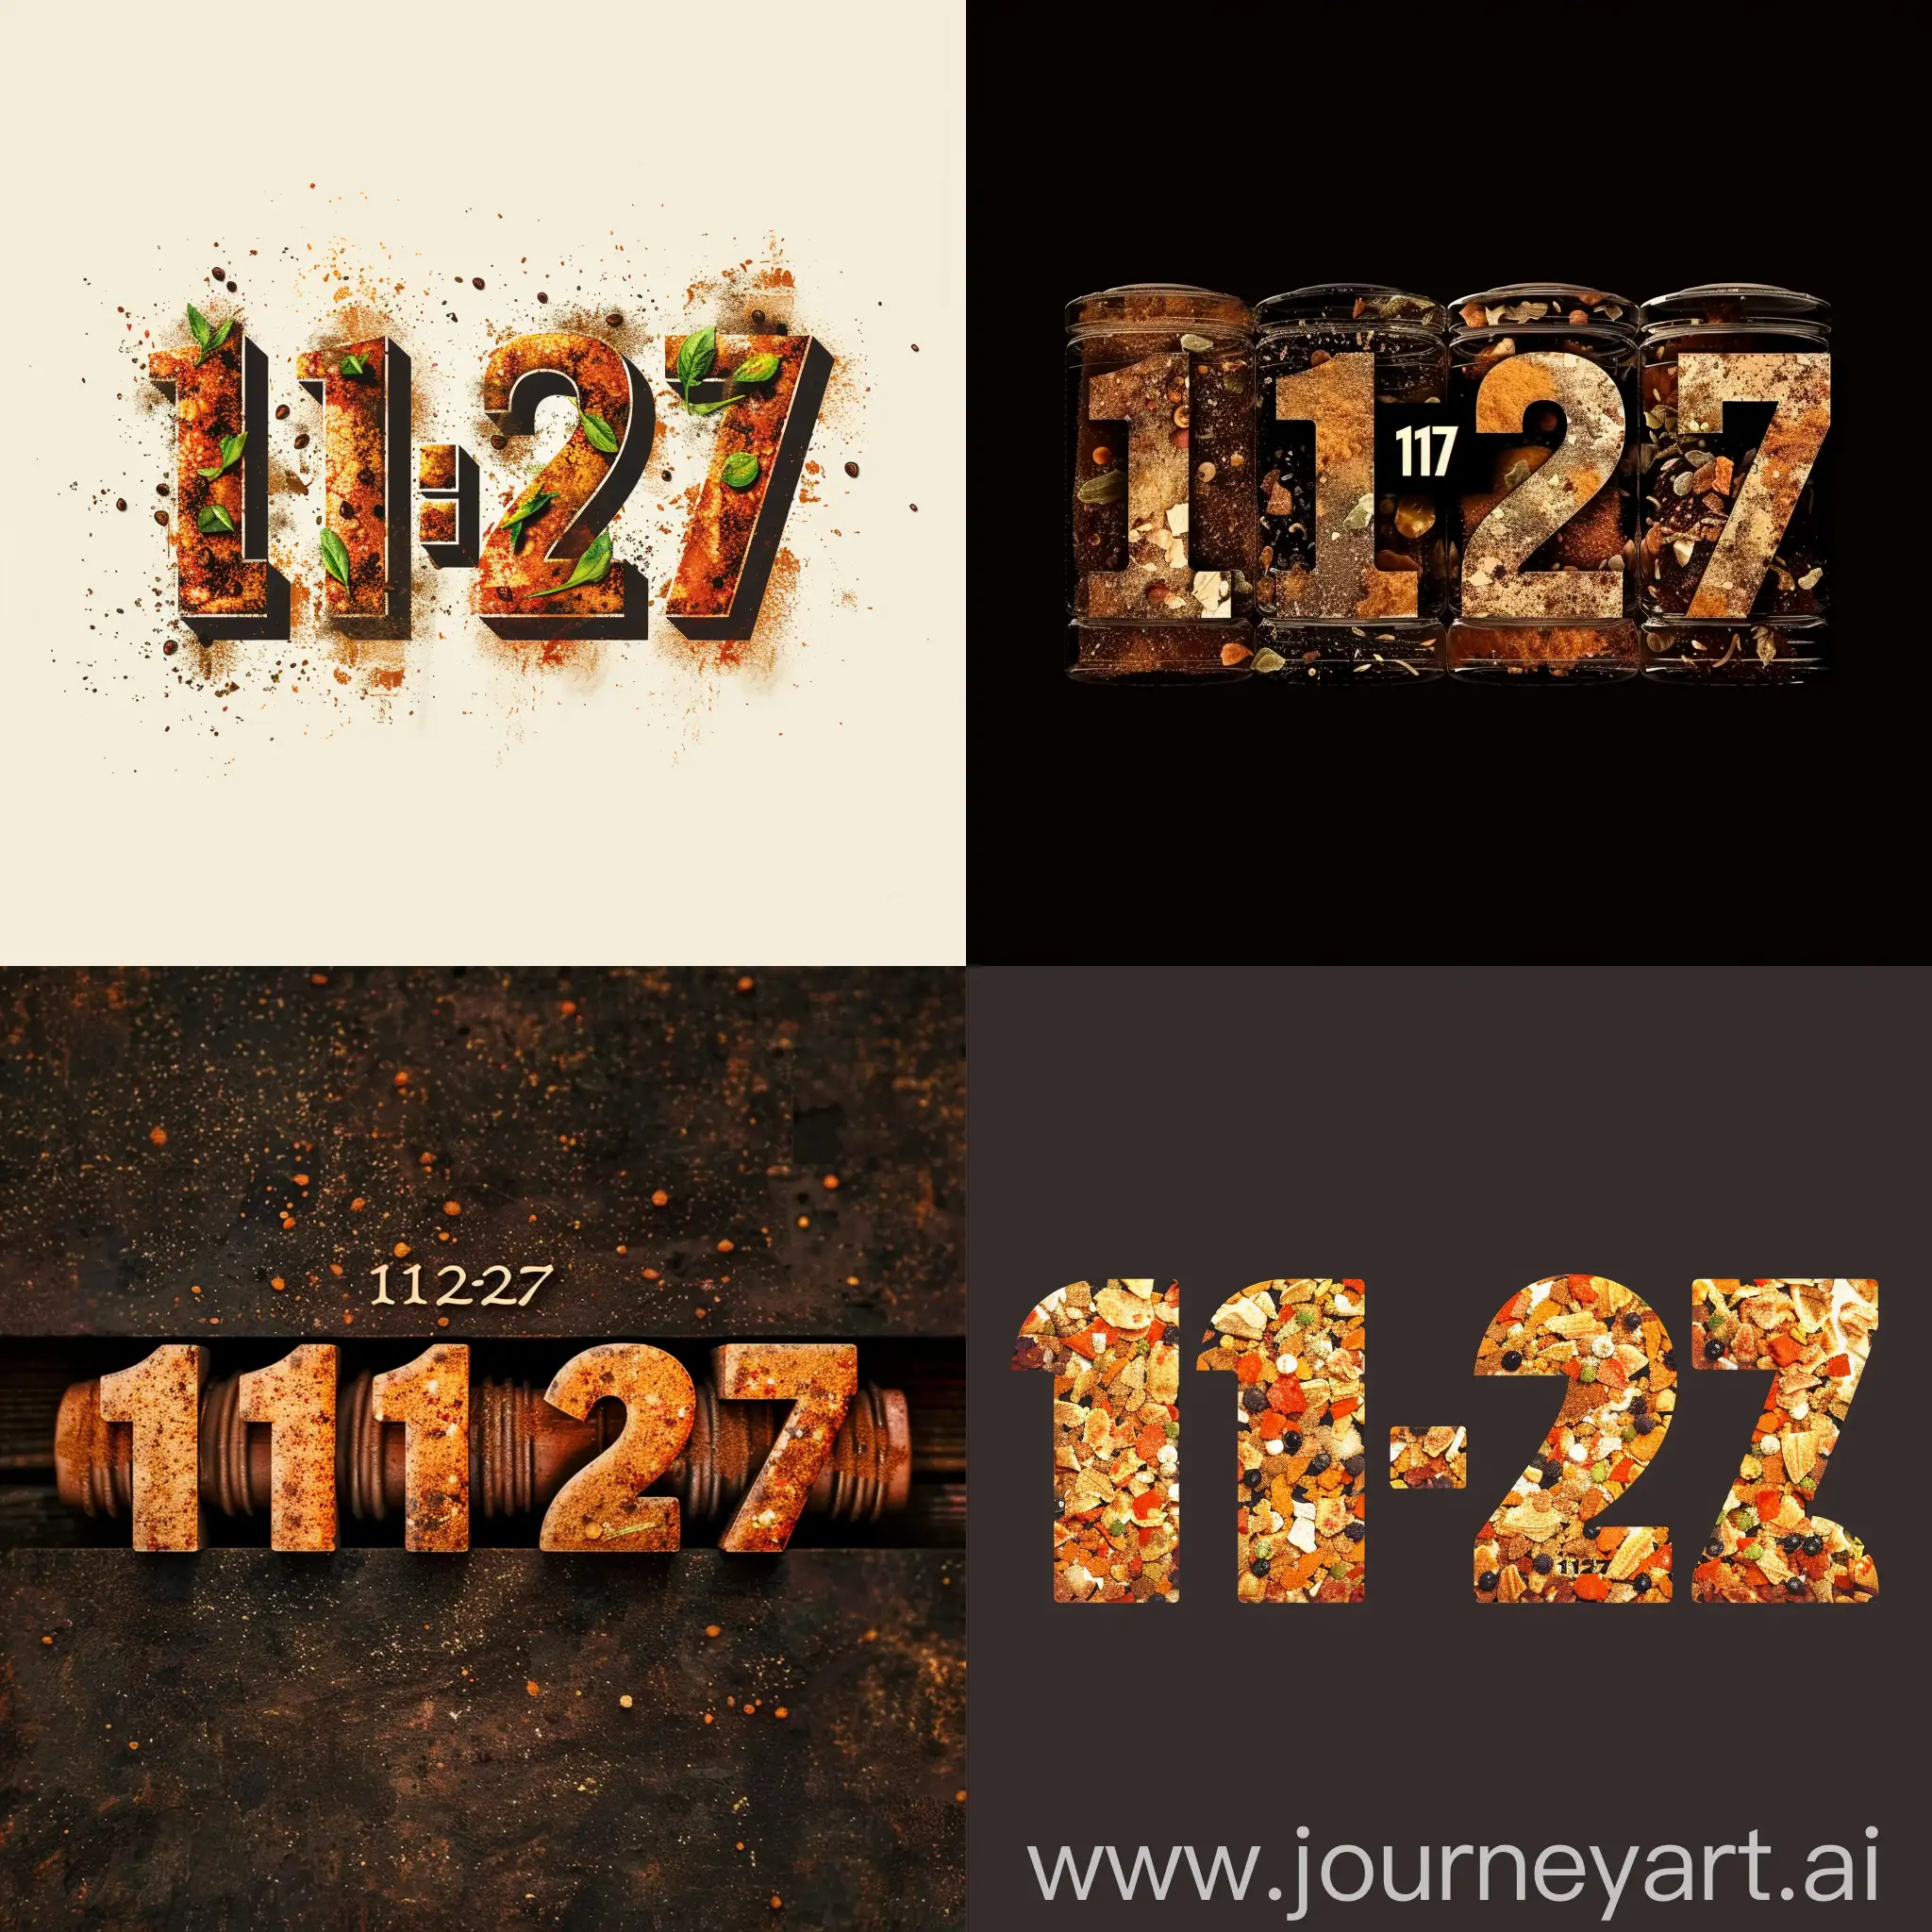 Premium-Spice-Brand-Logo-Design-1127-Handcrafted-Blends-in-Earthy-Tones